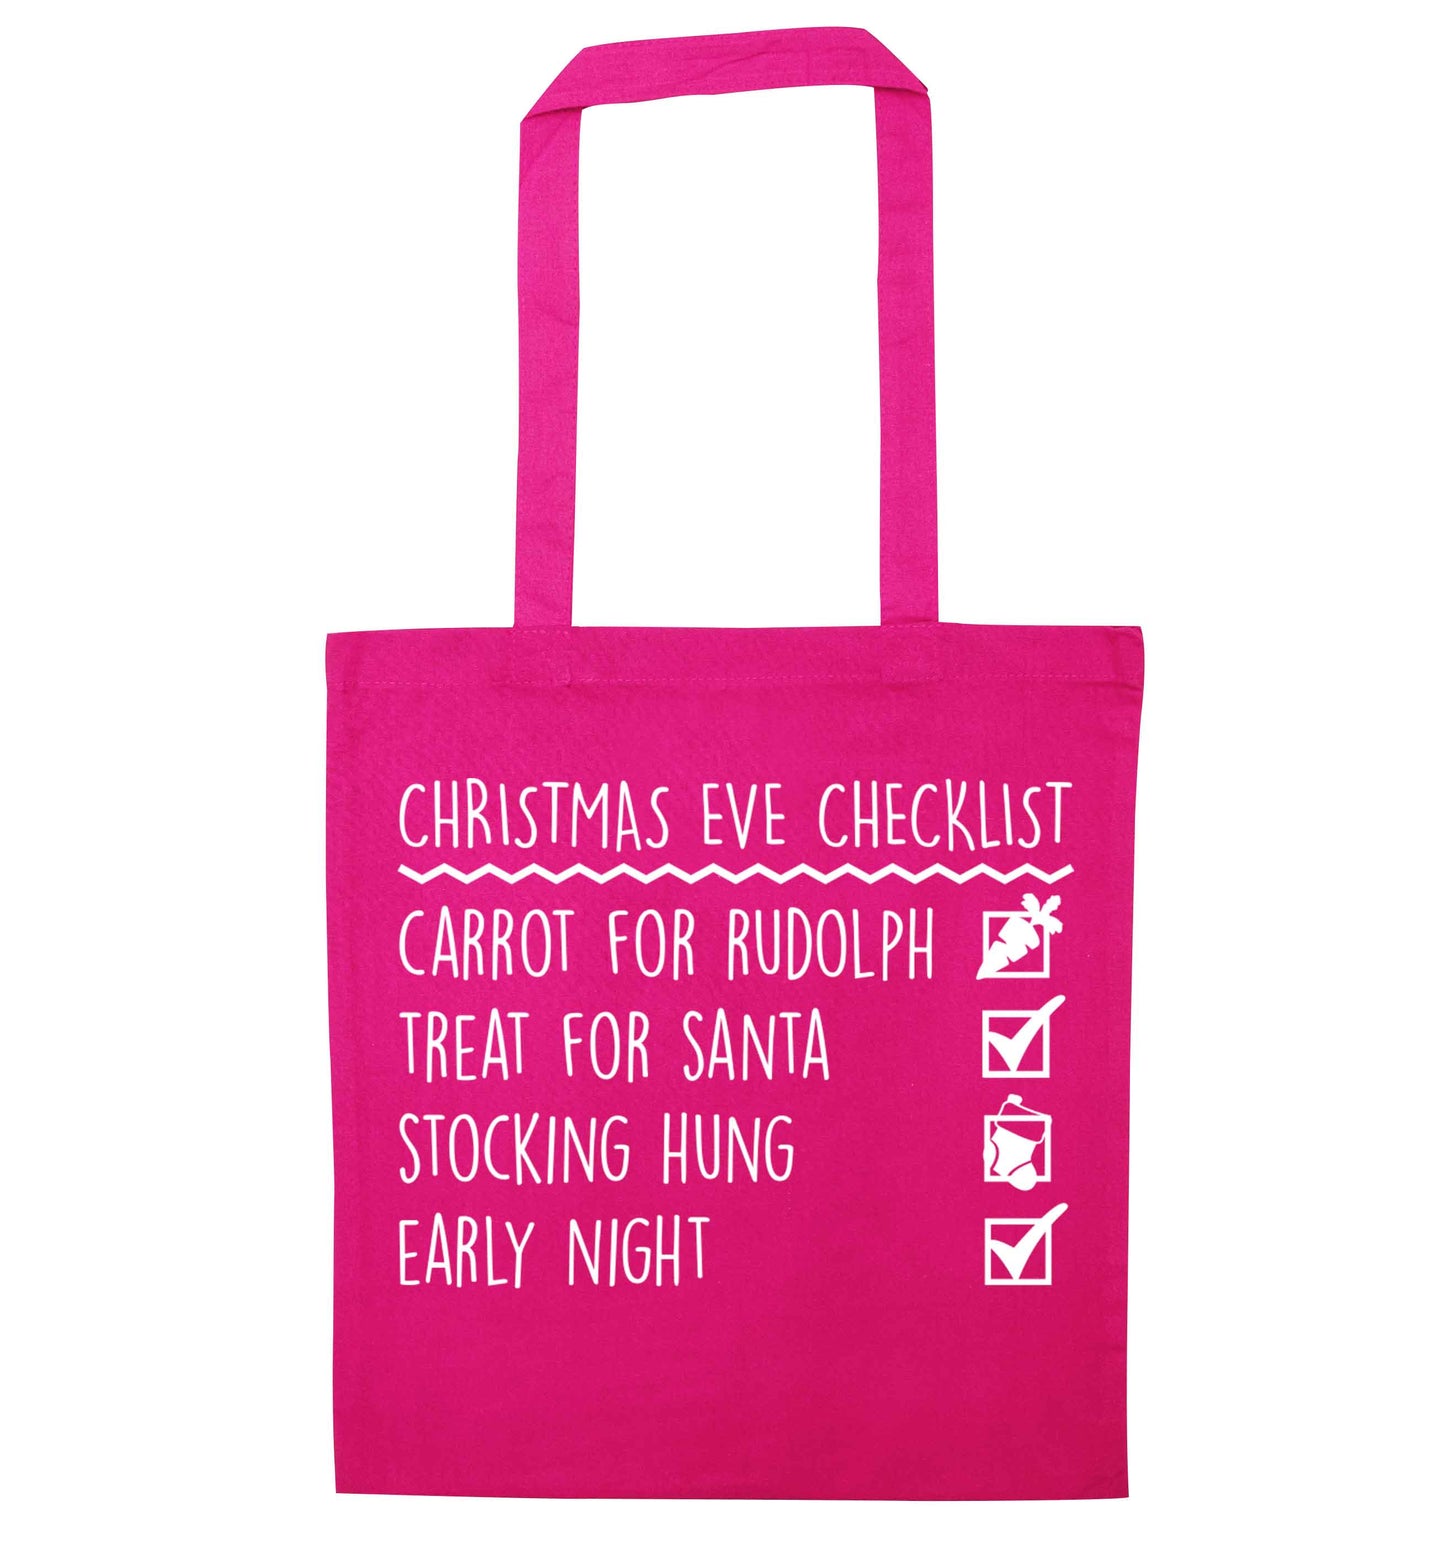 Candy Canes Candy Corns pink tote bag